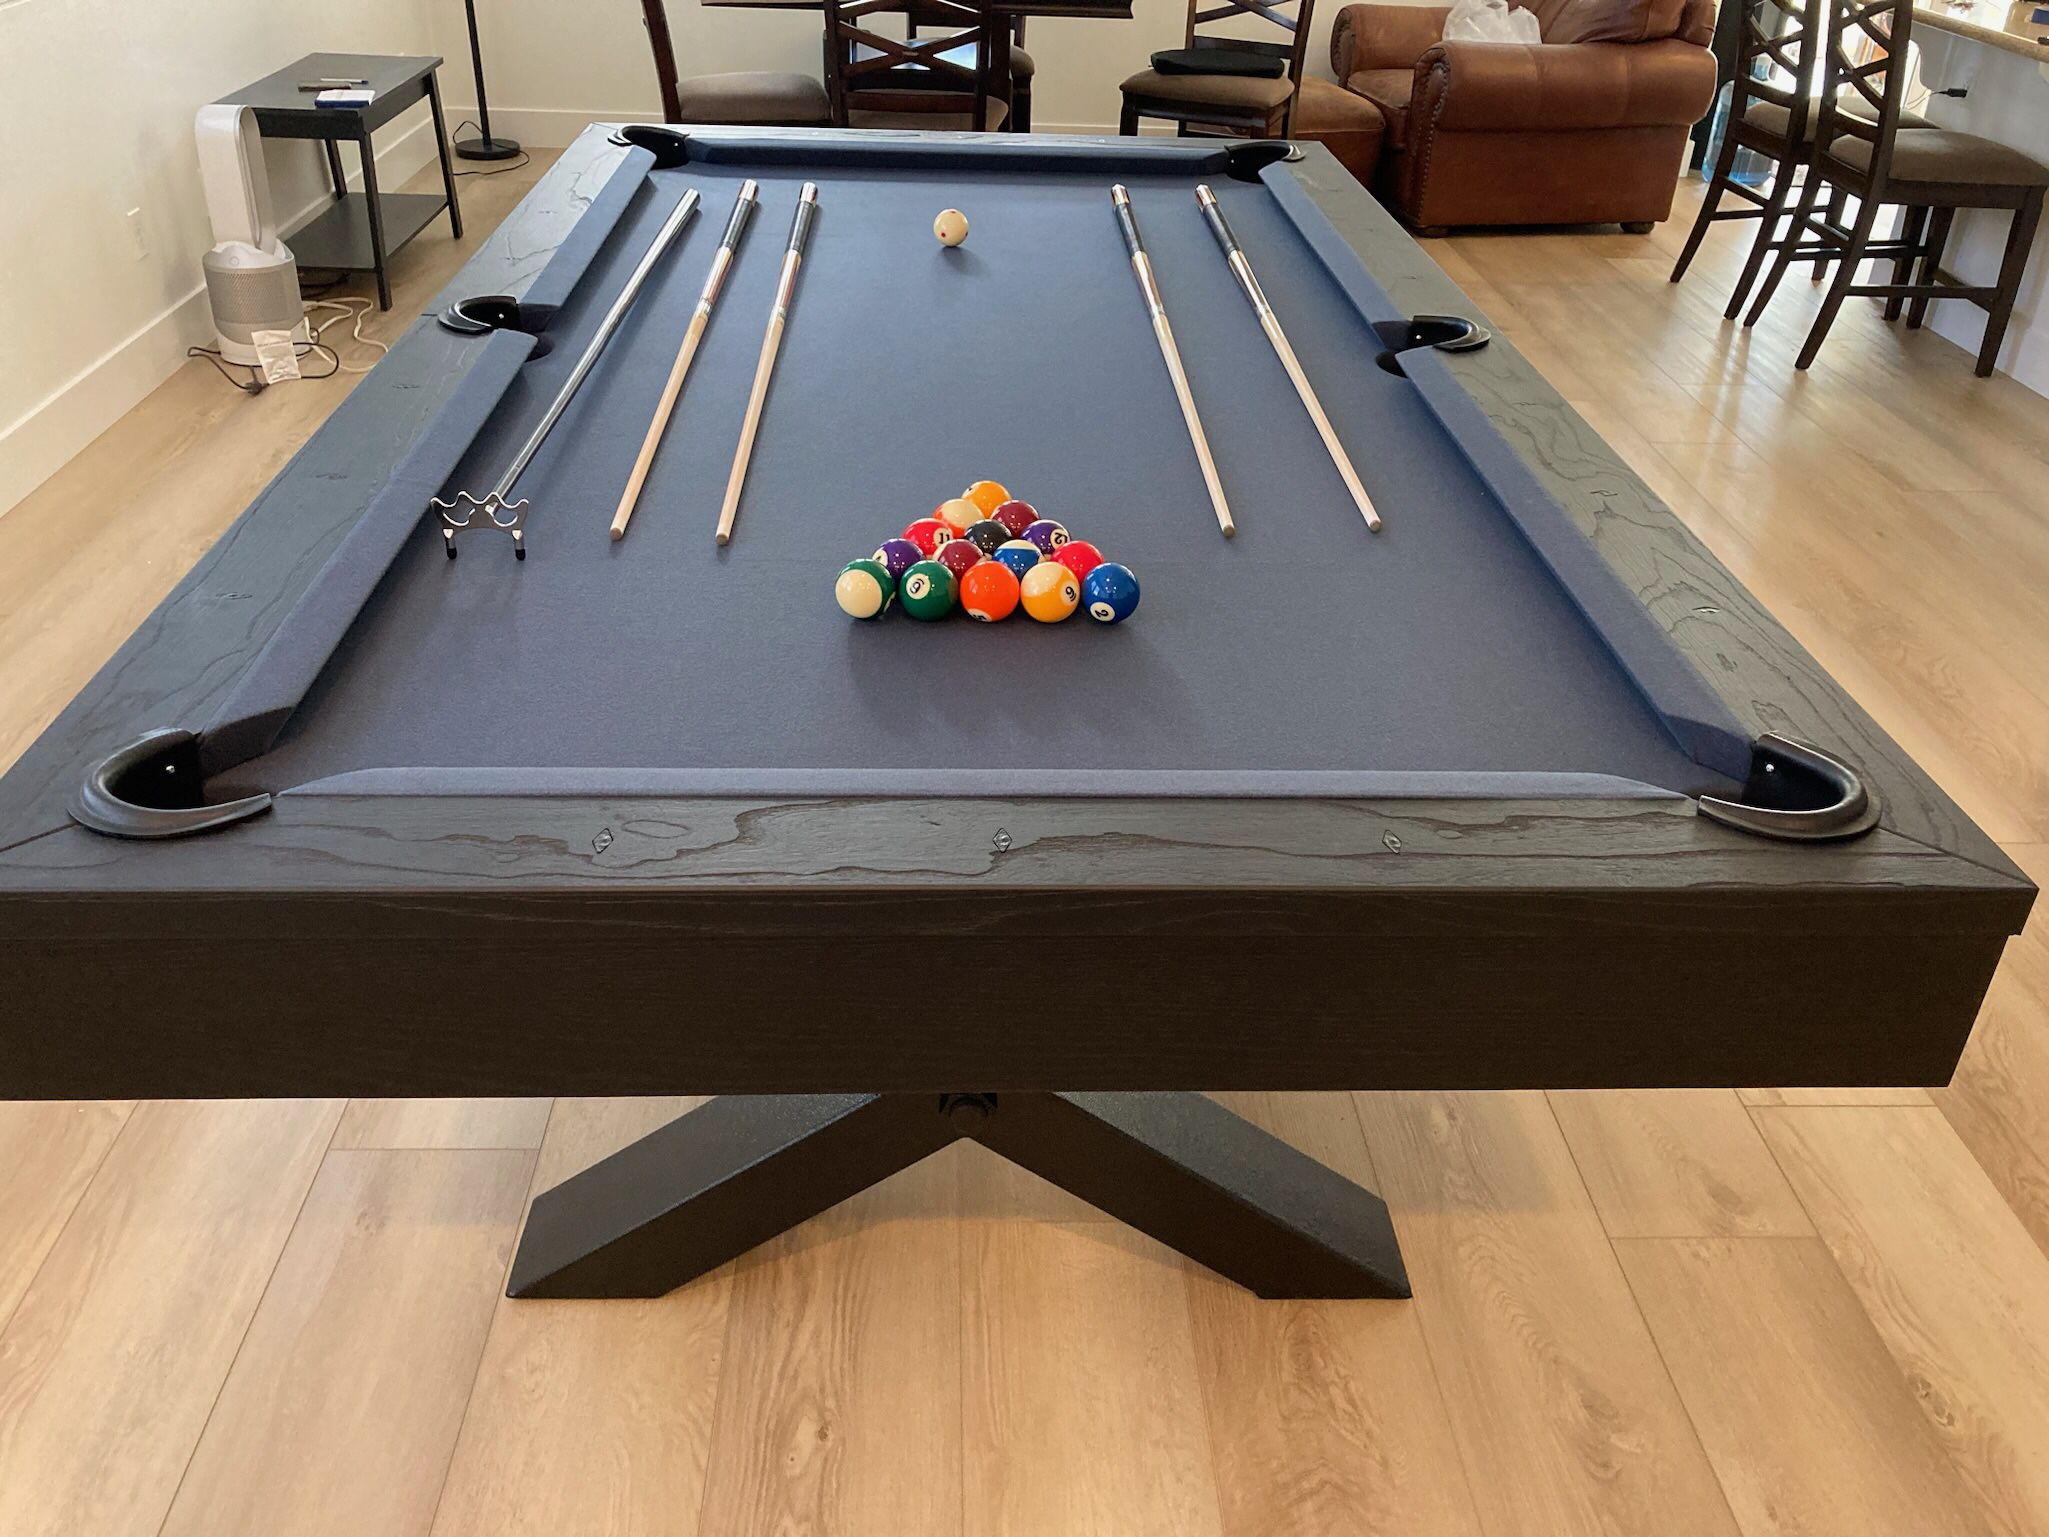 Free Install NEW Pool Table Billiard Tables 8 Or7 Foot